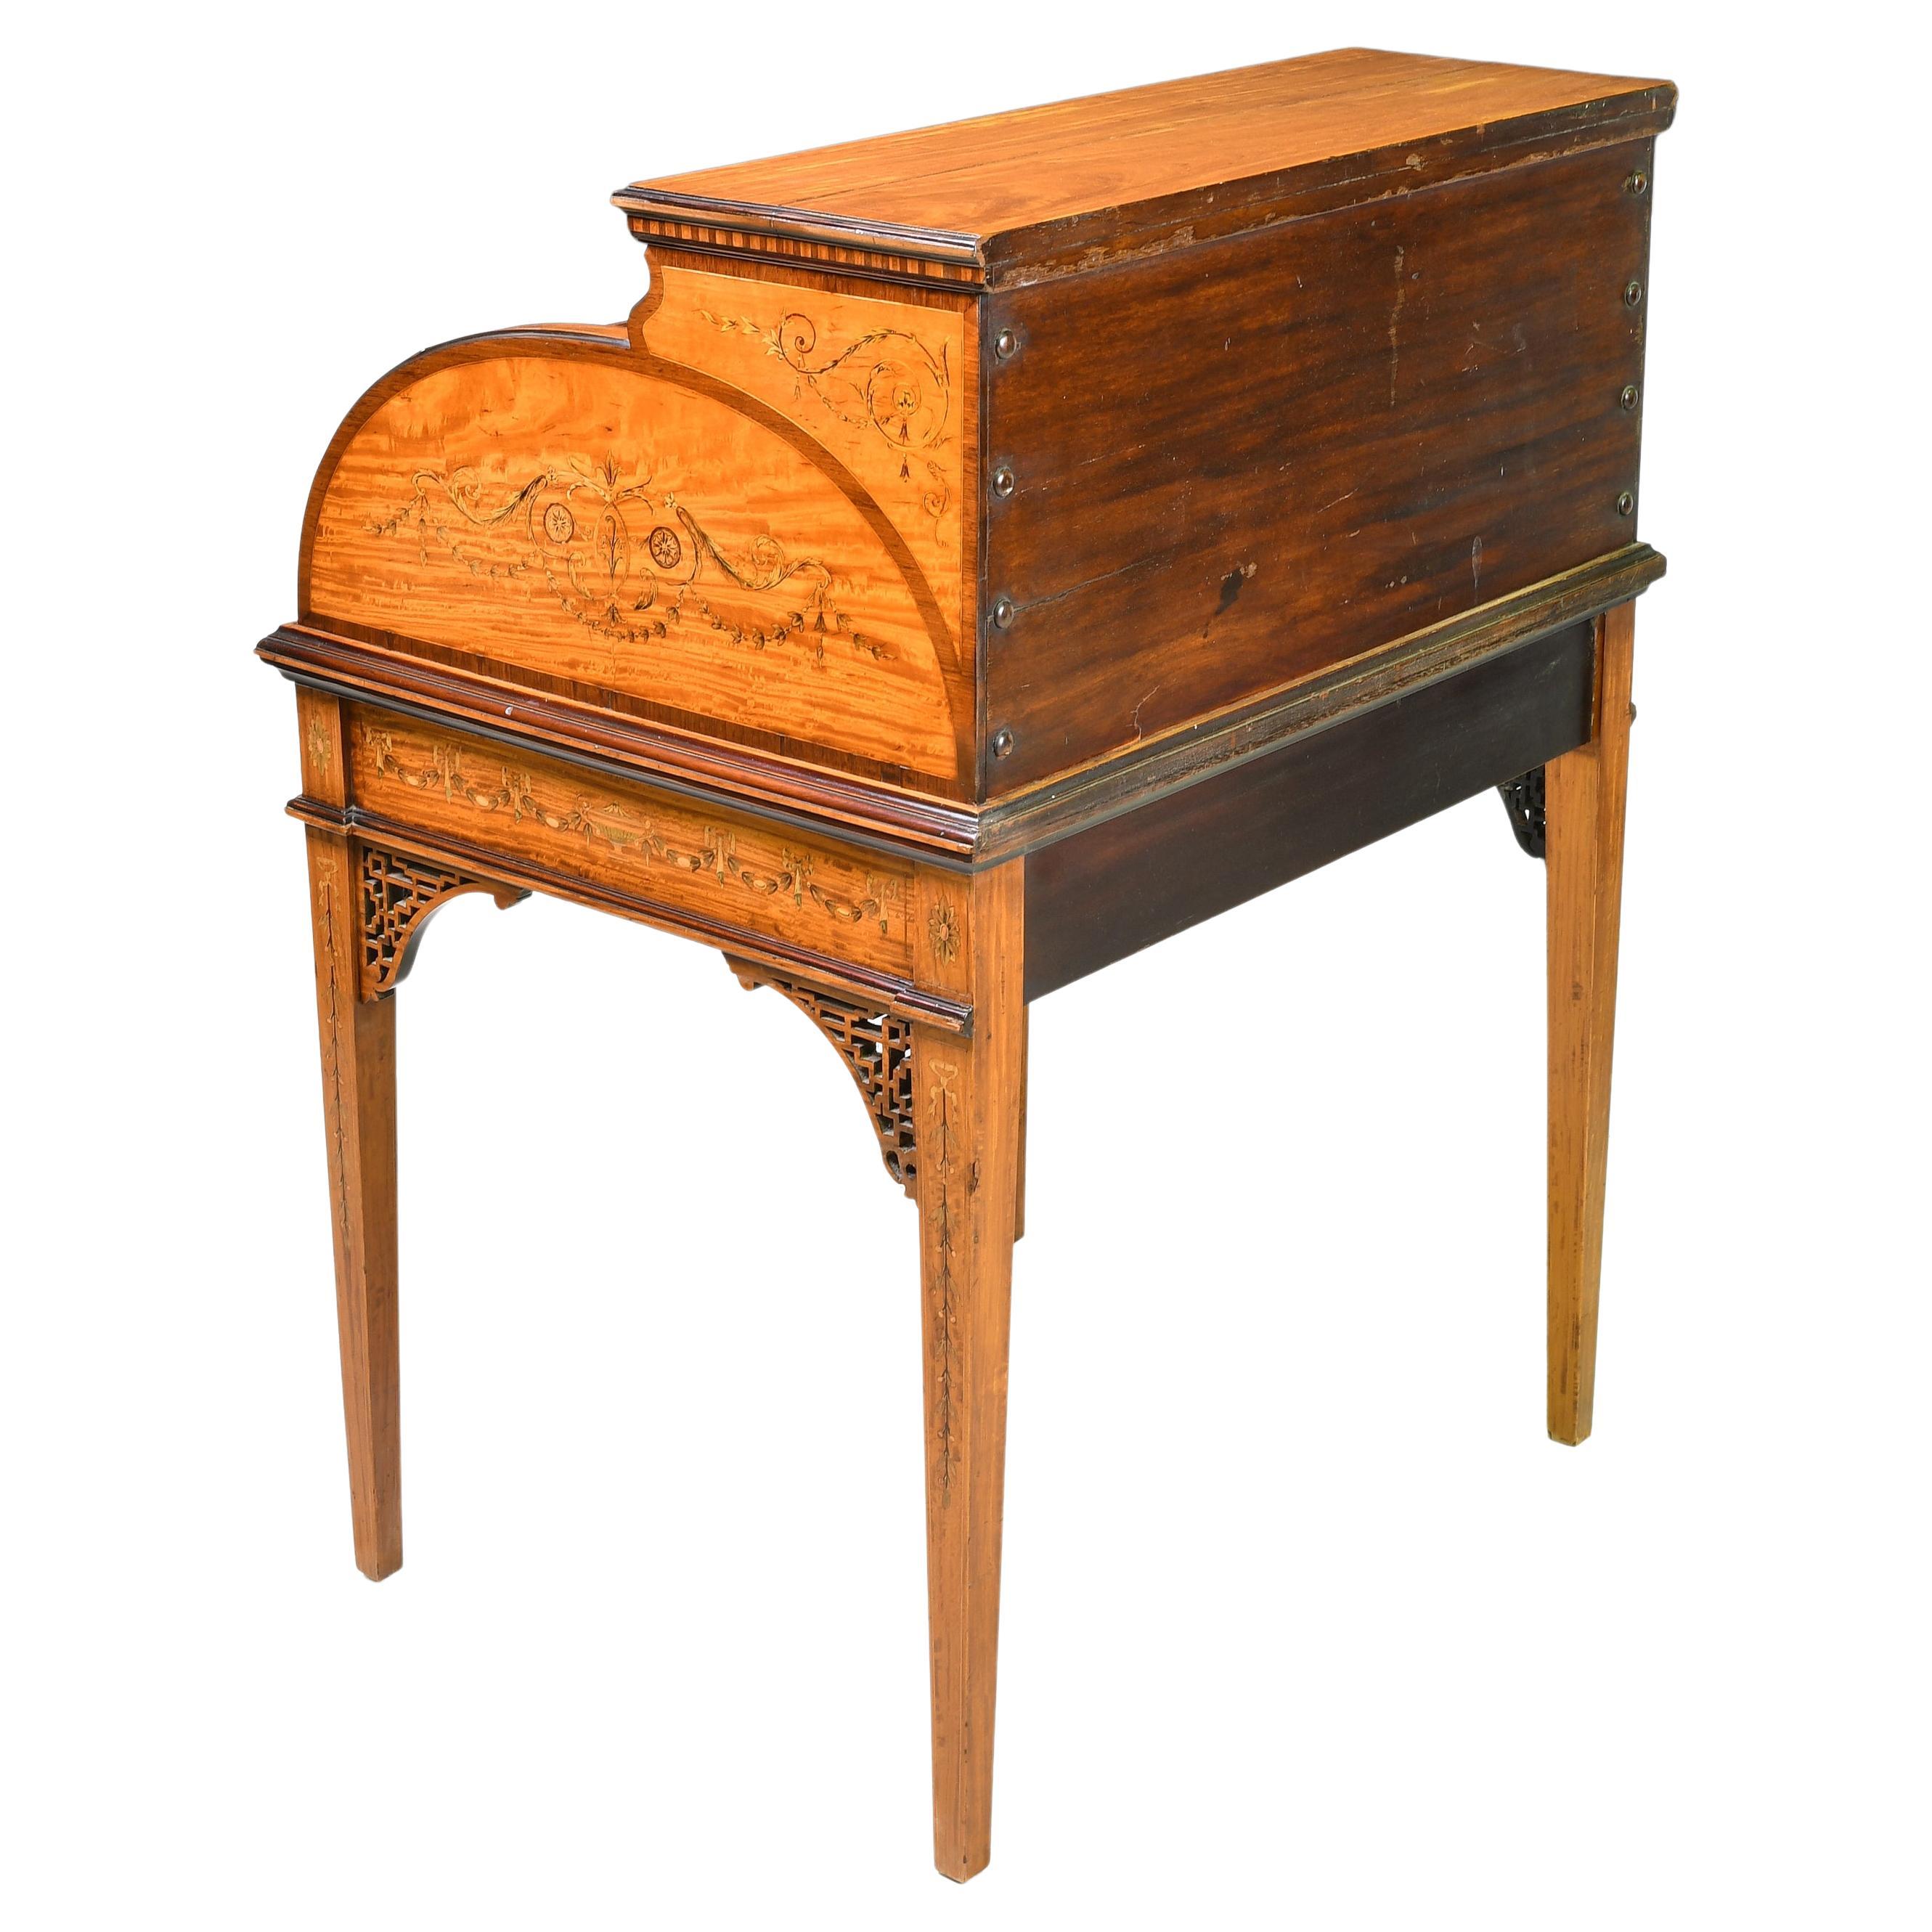 Leather American Gilded Age Hepplewhite-Style Writing Desk in Satinwood w/ Marquetry For Sale